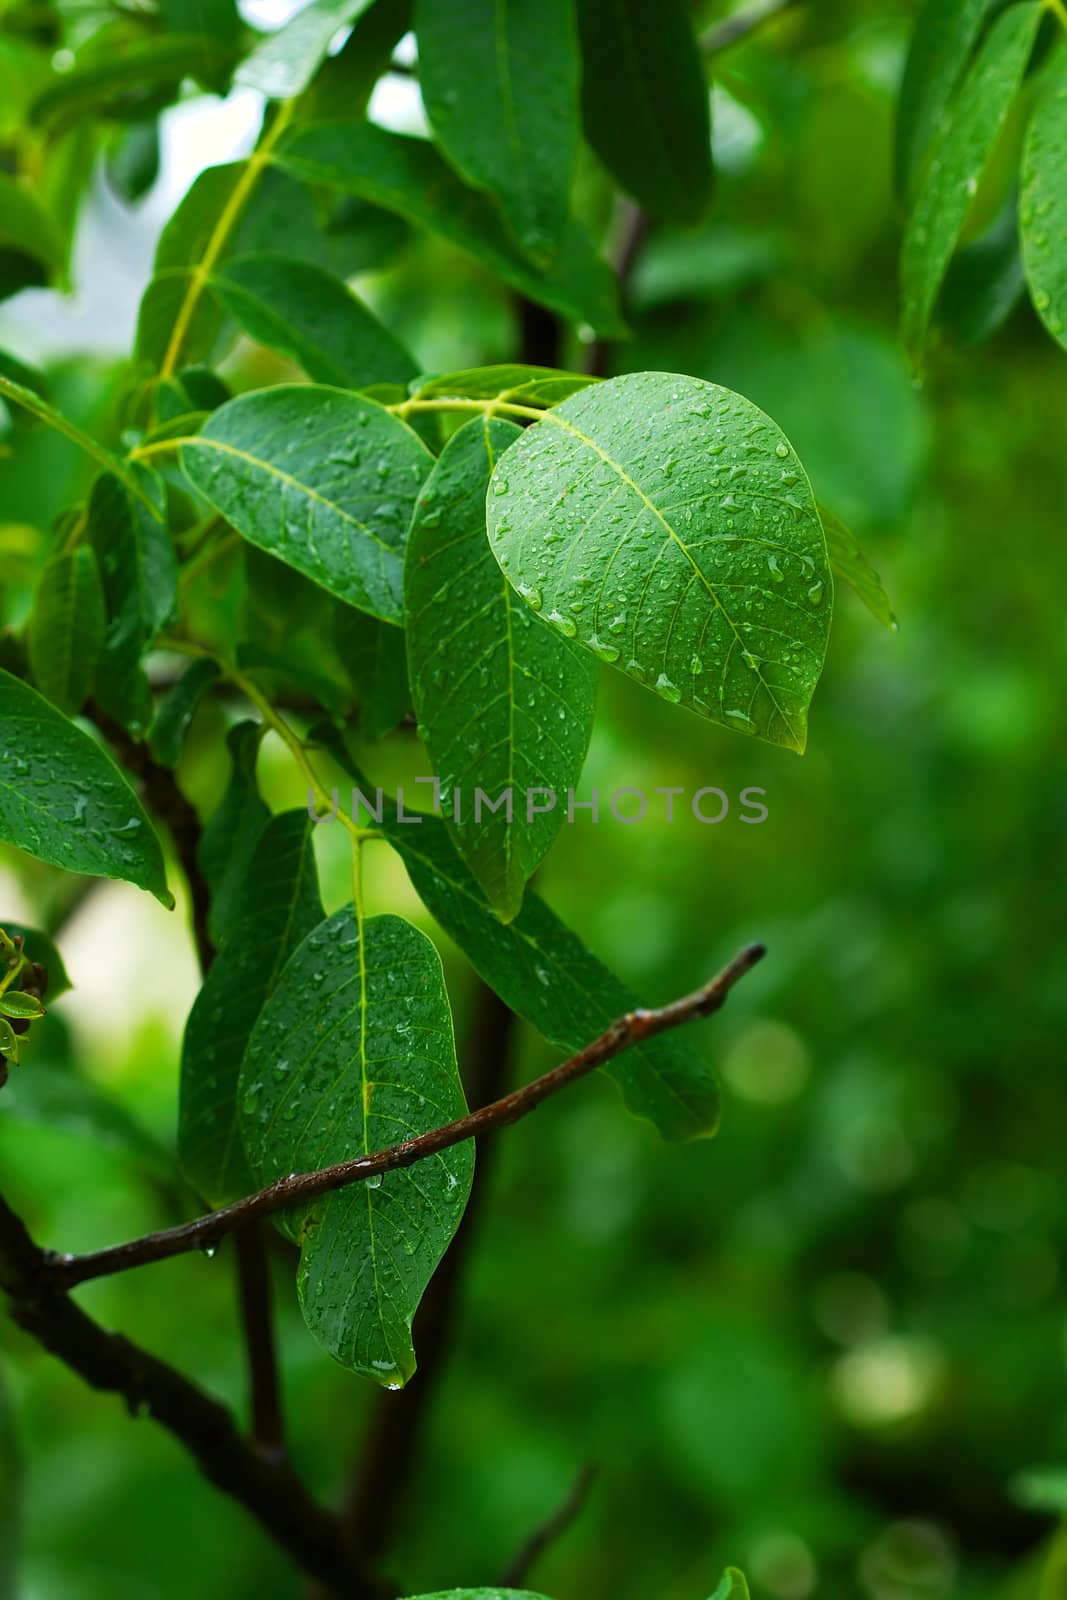 Raindrops on the green leaves of a forest